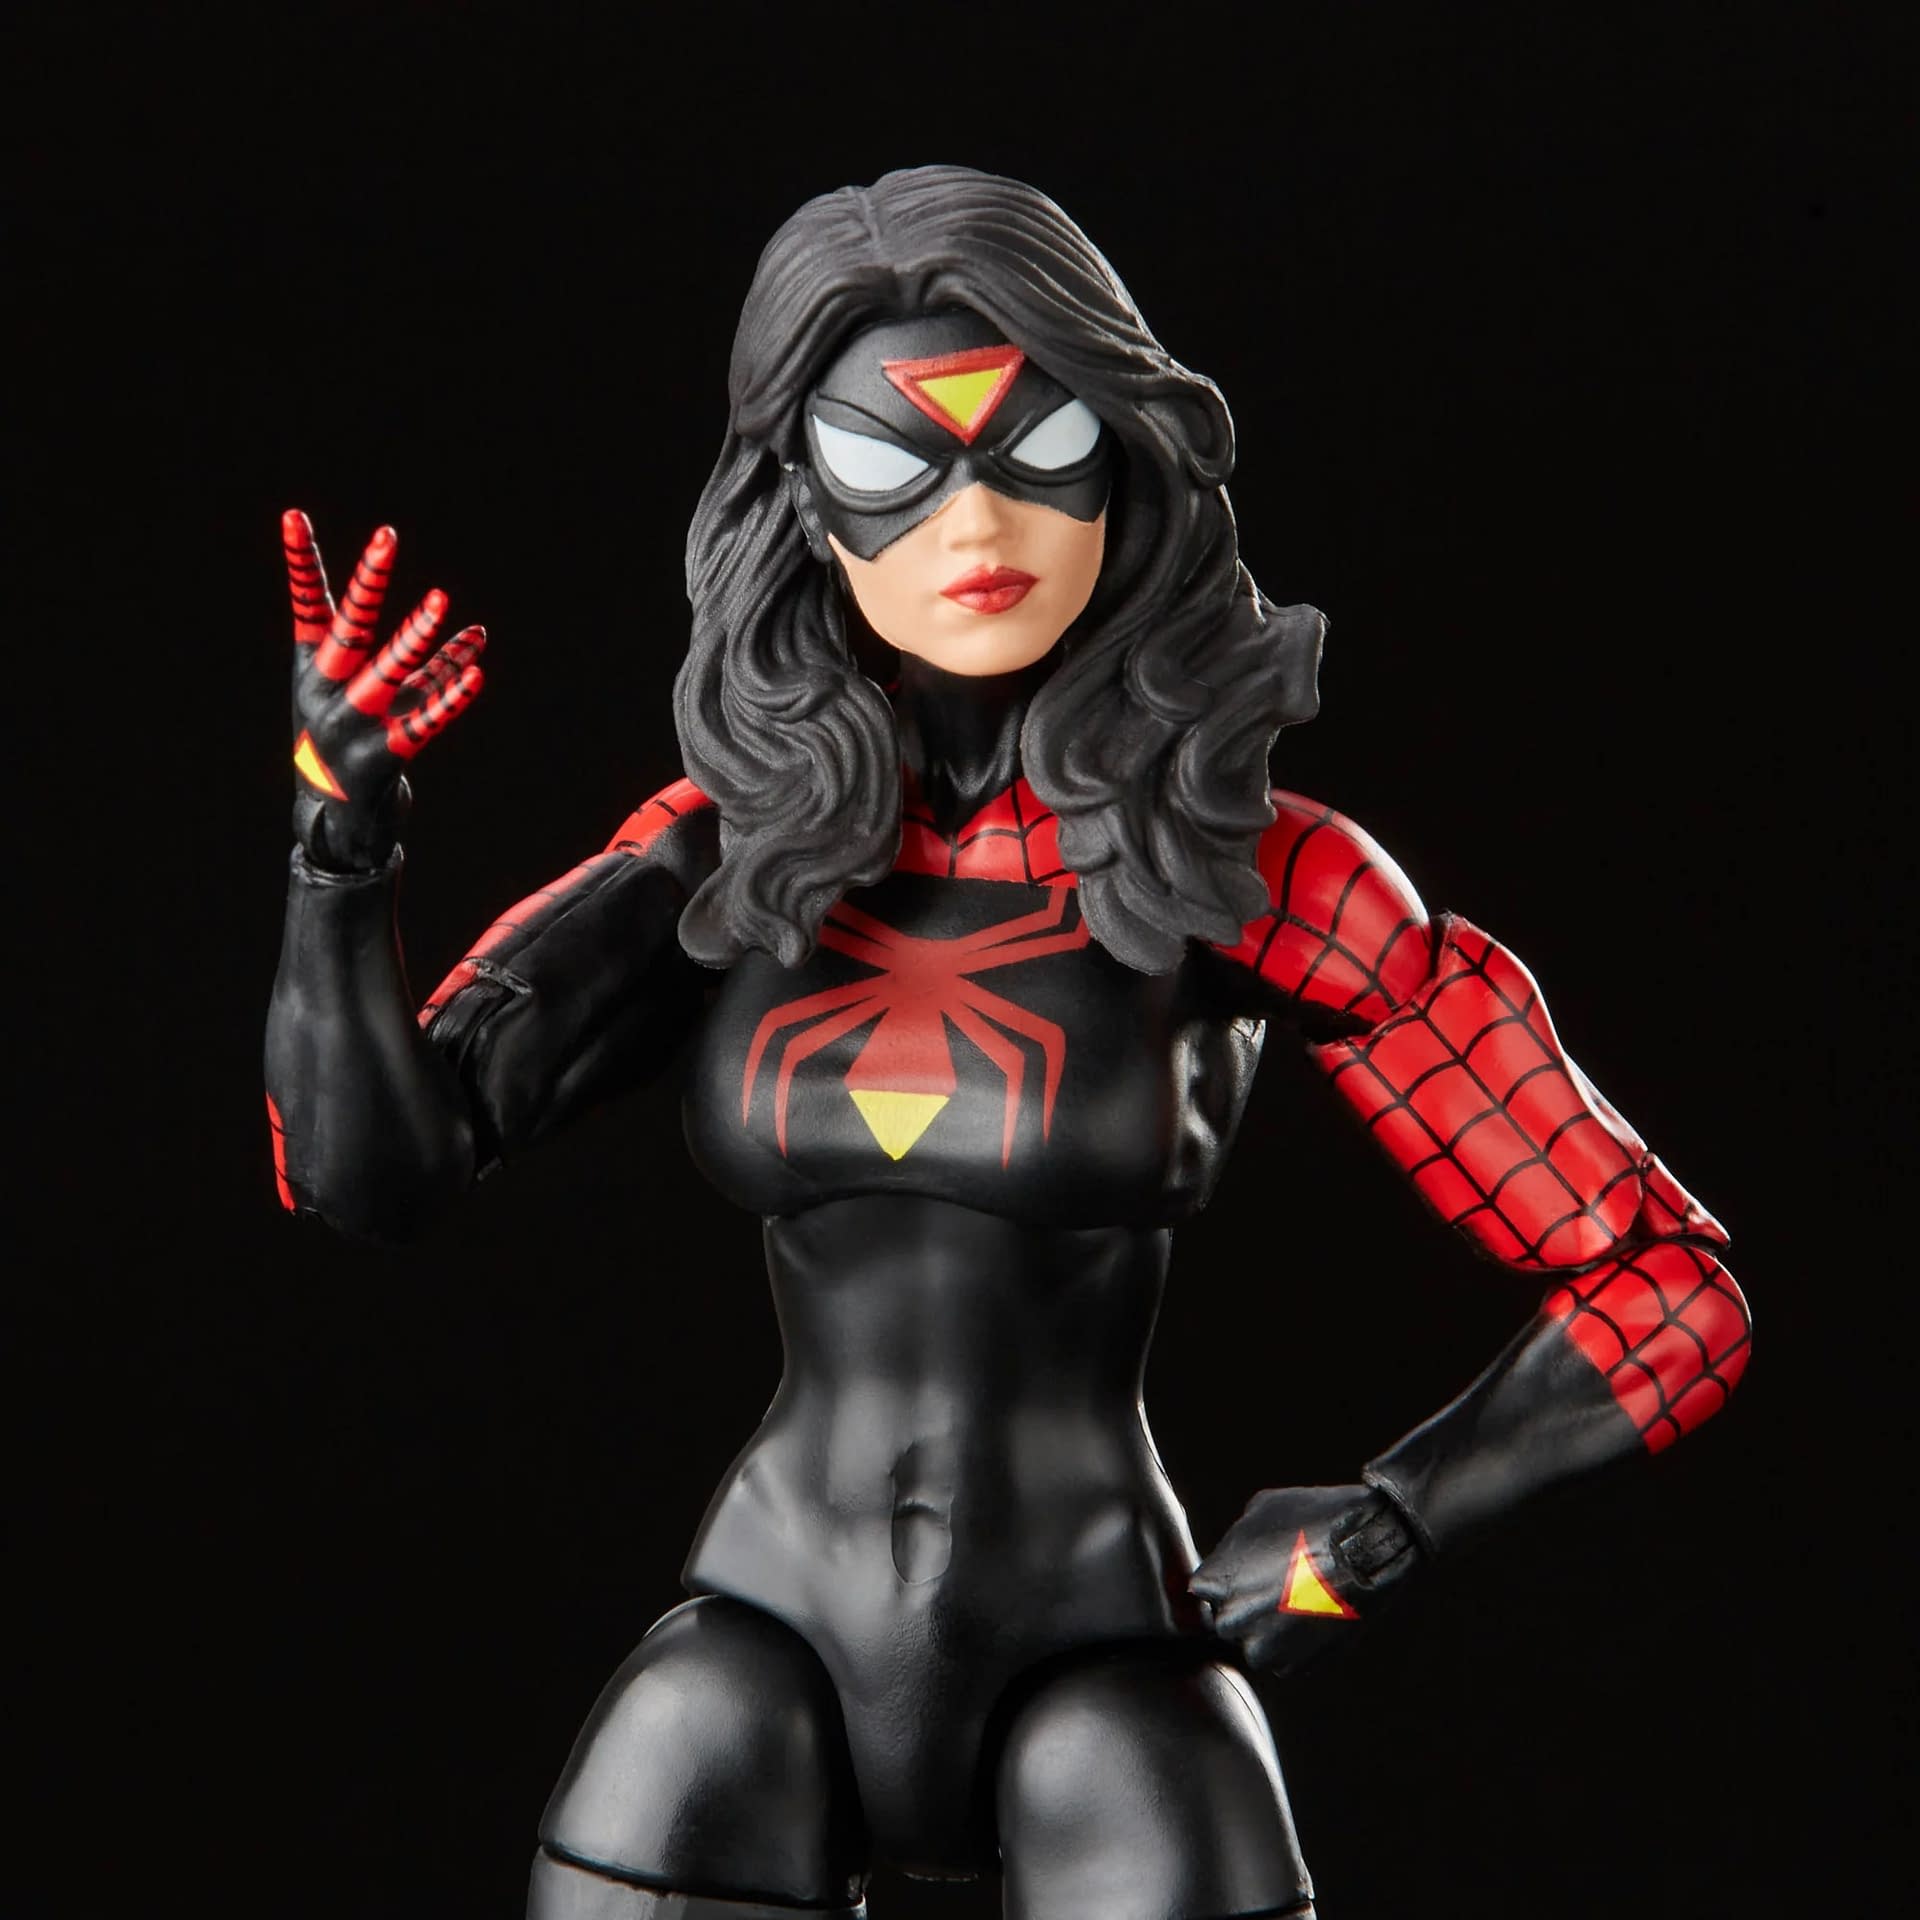 Spider-Woman Returns to Marvel Legends with a Brand New Figure 